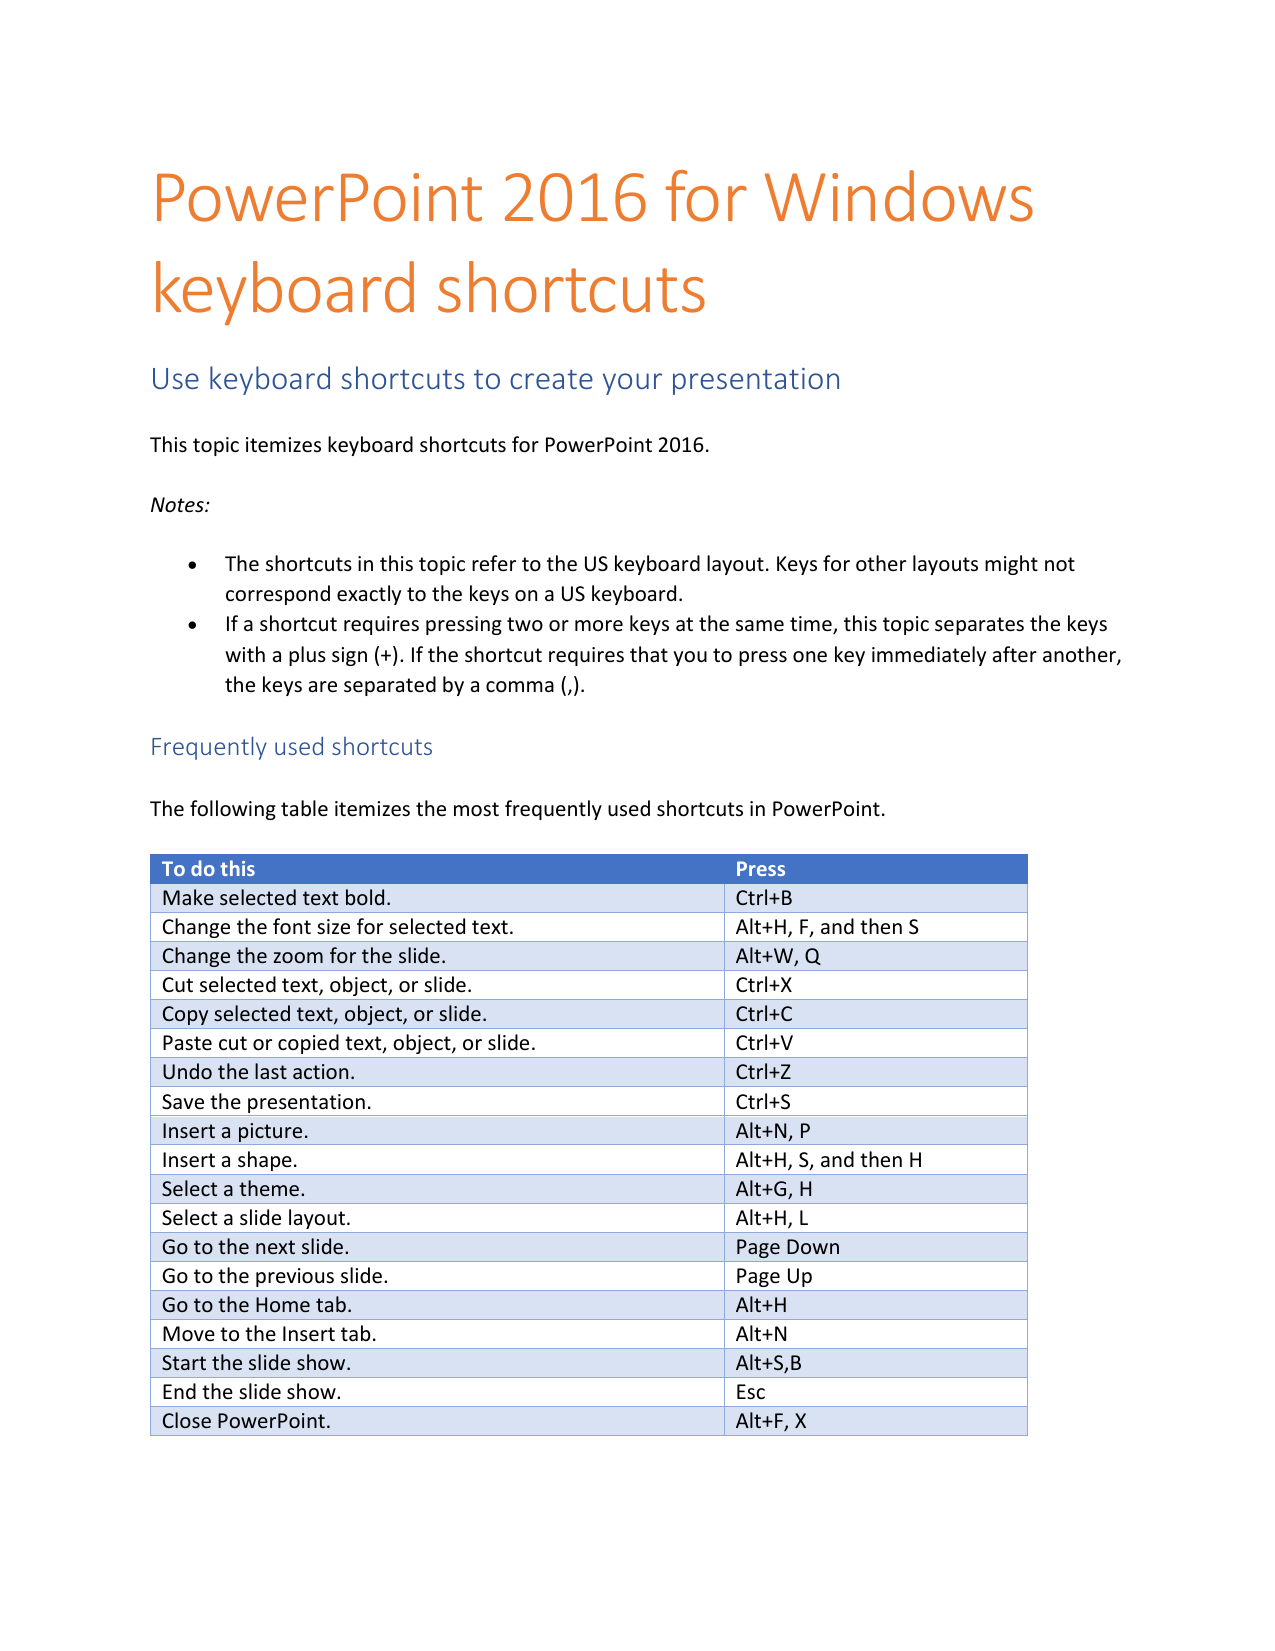 are there any keyboard shortcuts for powerpoint